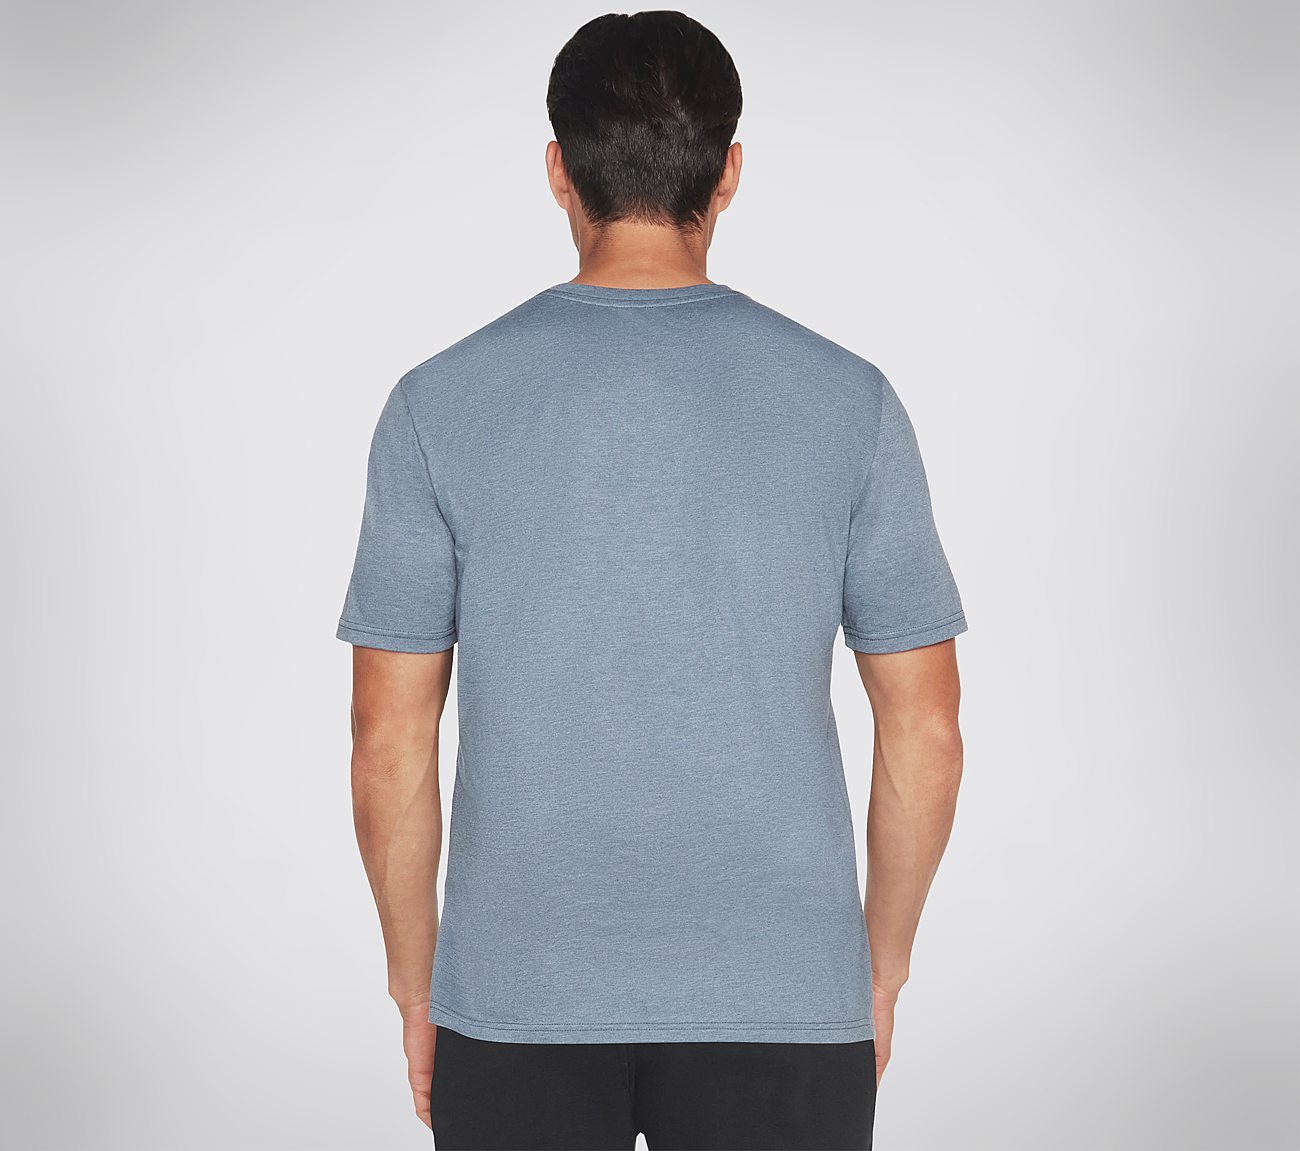 MOTION TEE, BLUE/GREY Apparel Top View